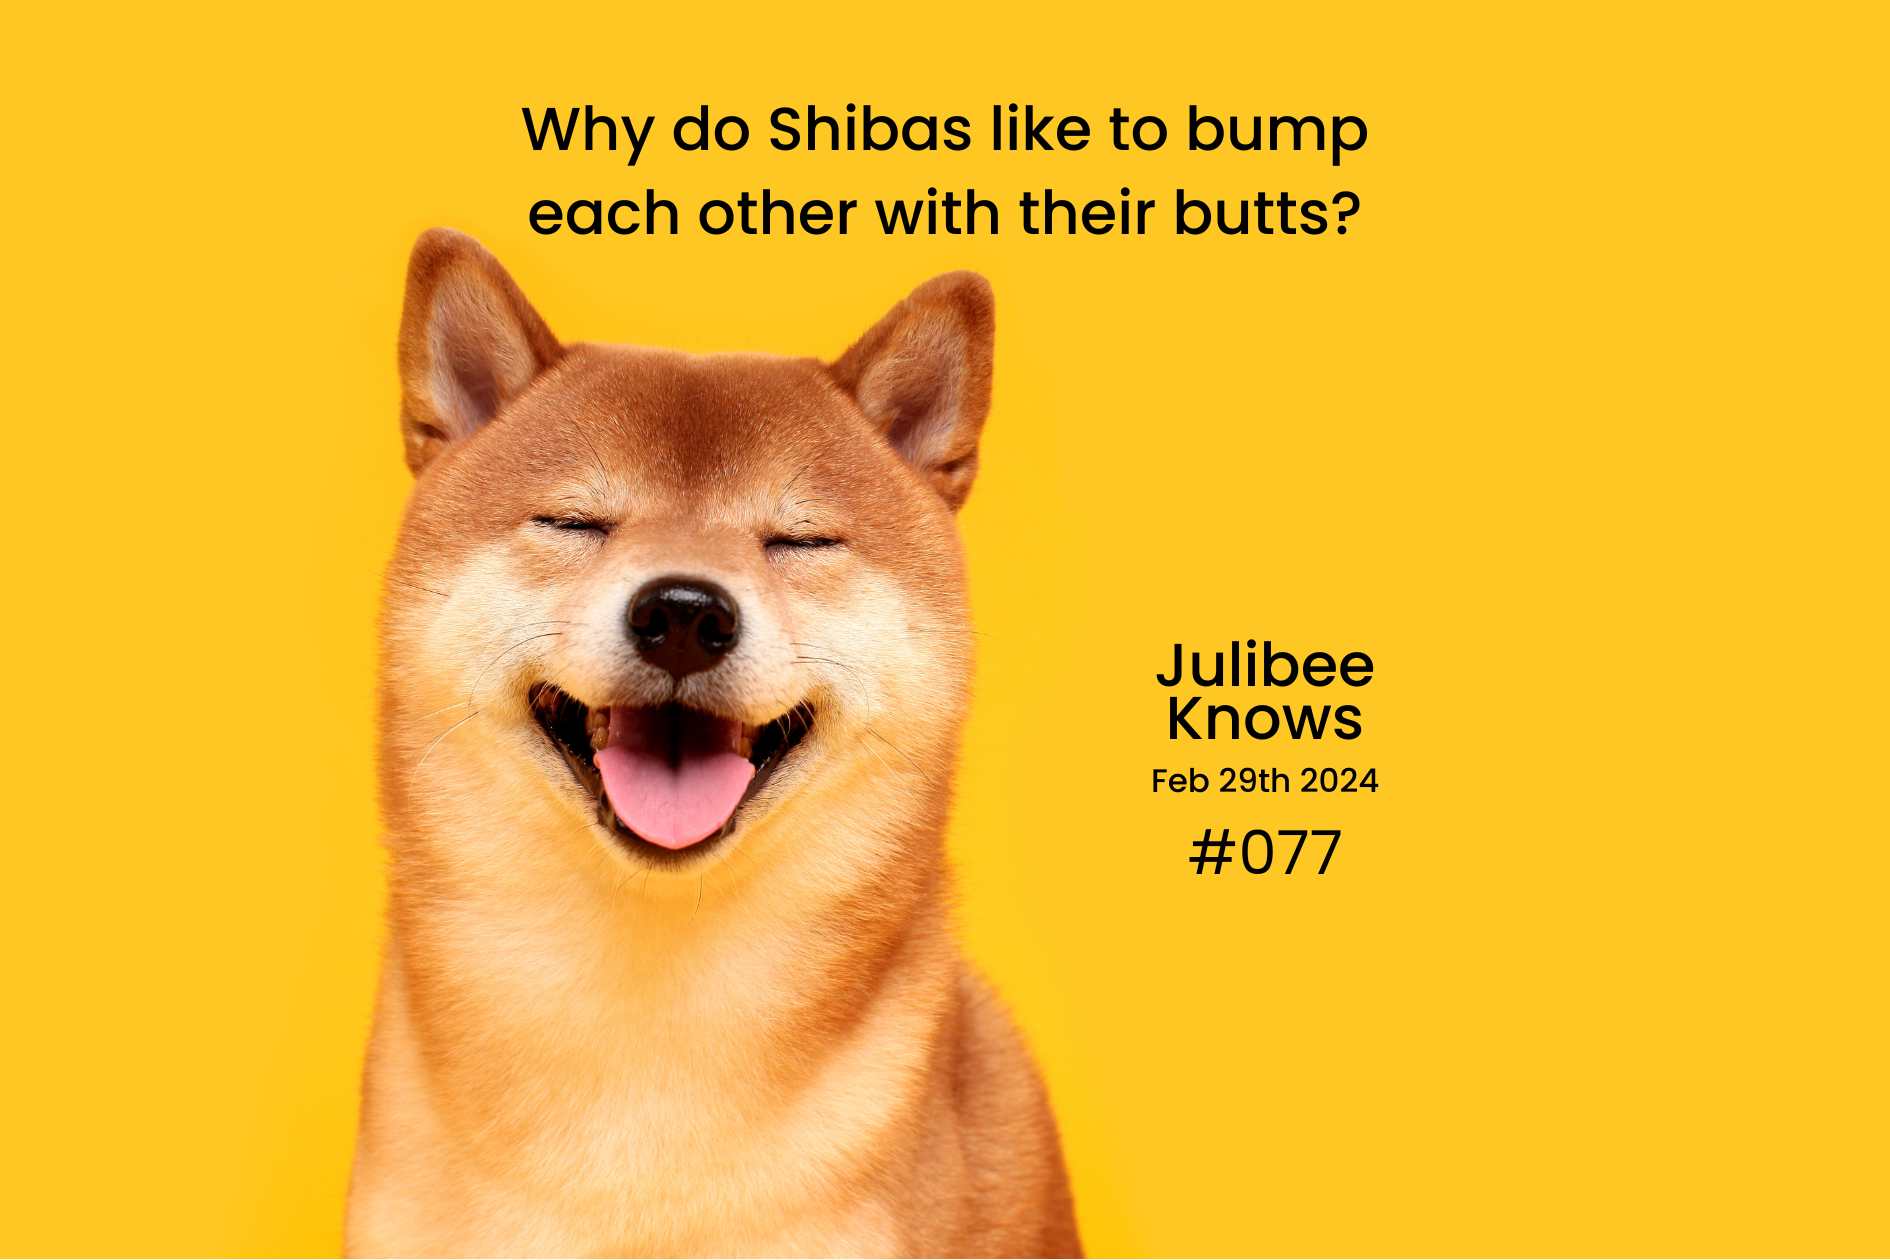 Why do Shibas like to bump each other with their butts?